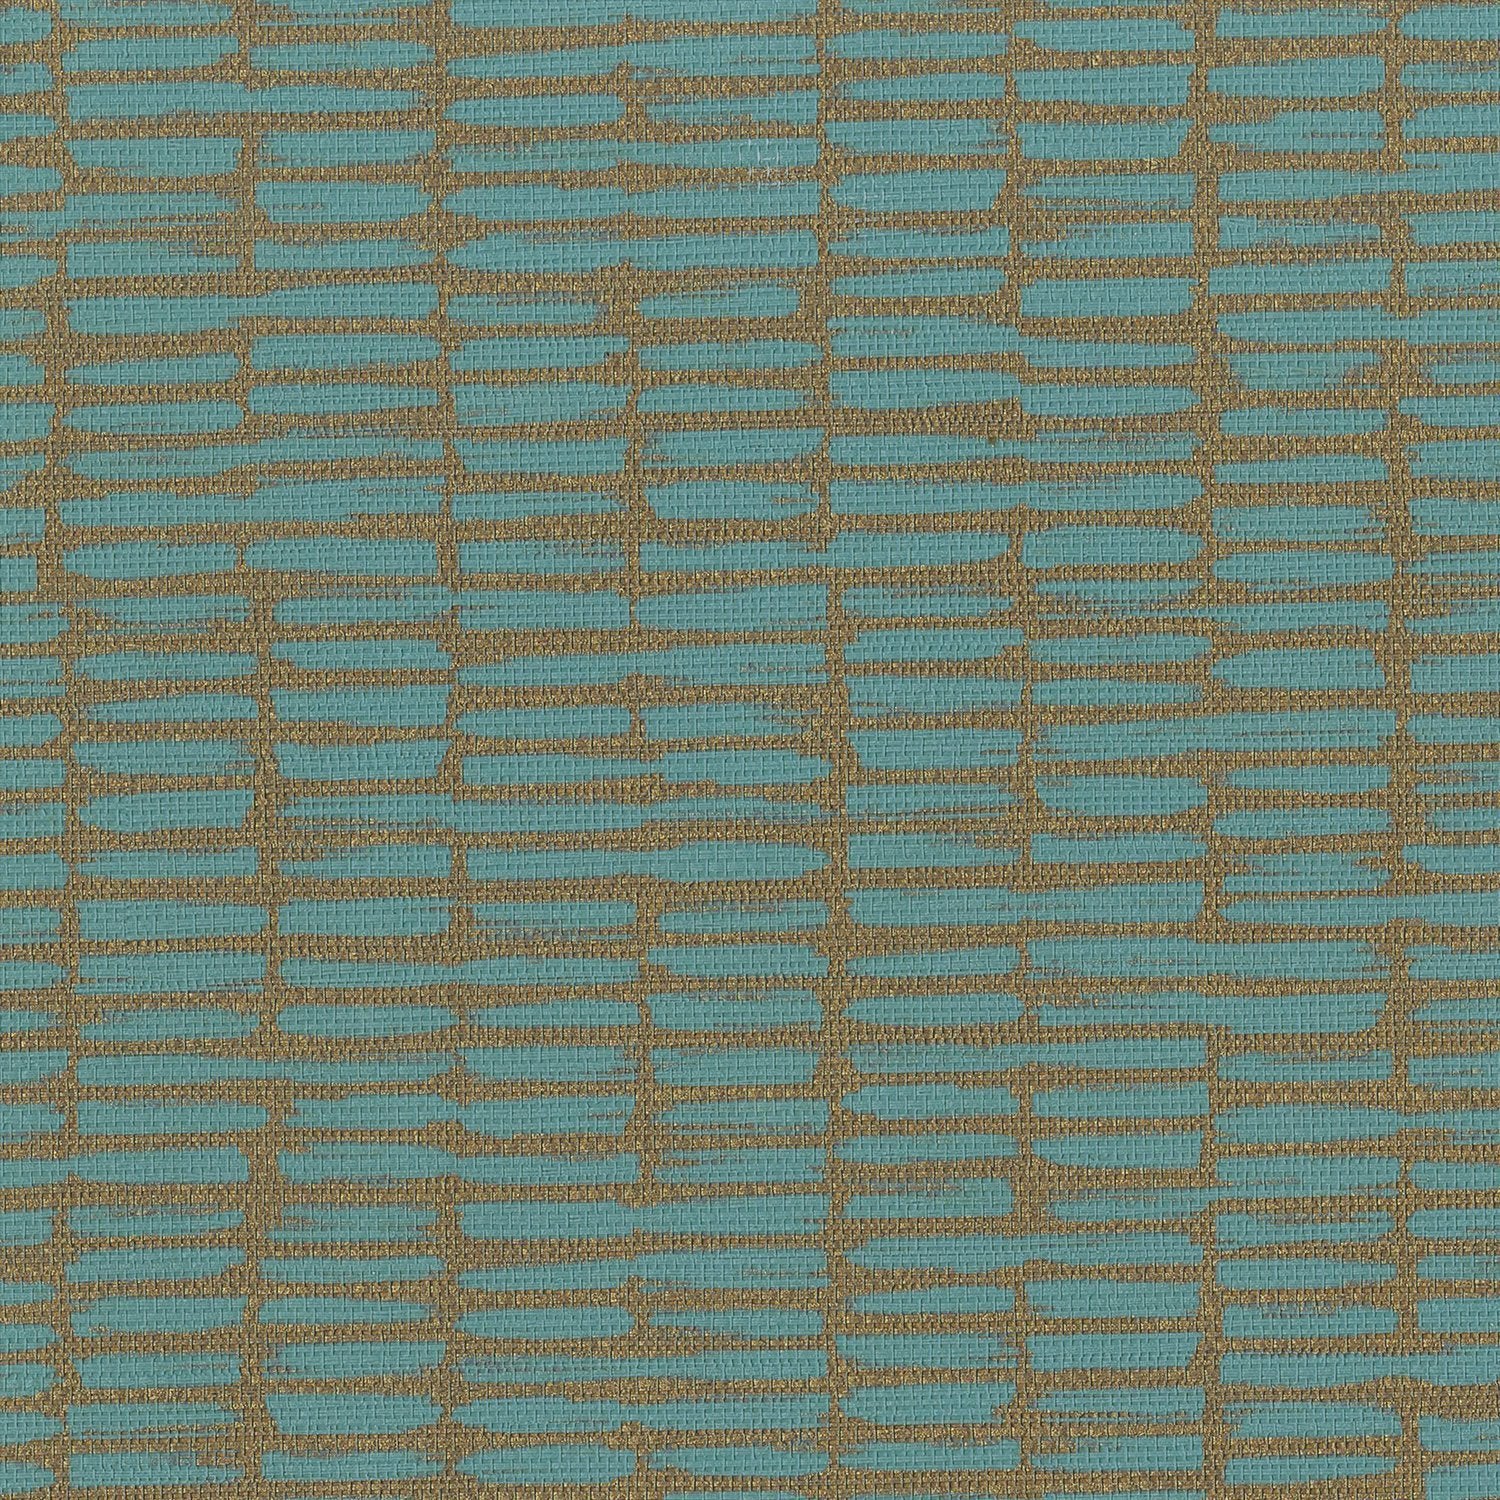 Dash-ing - Y48019 - Wallcovering - Vycon - Kube Contract